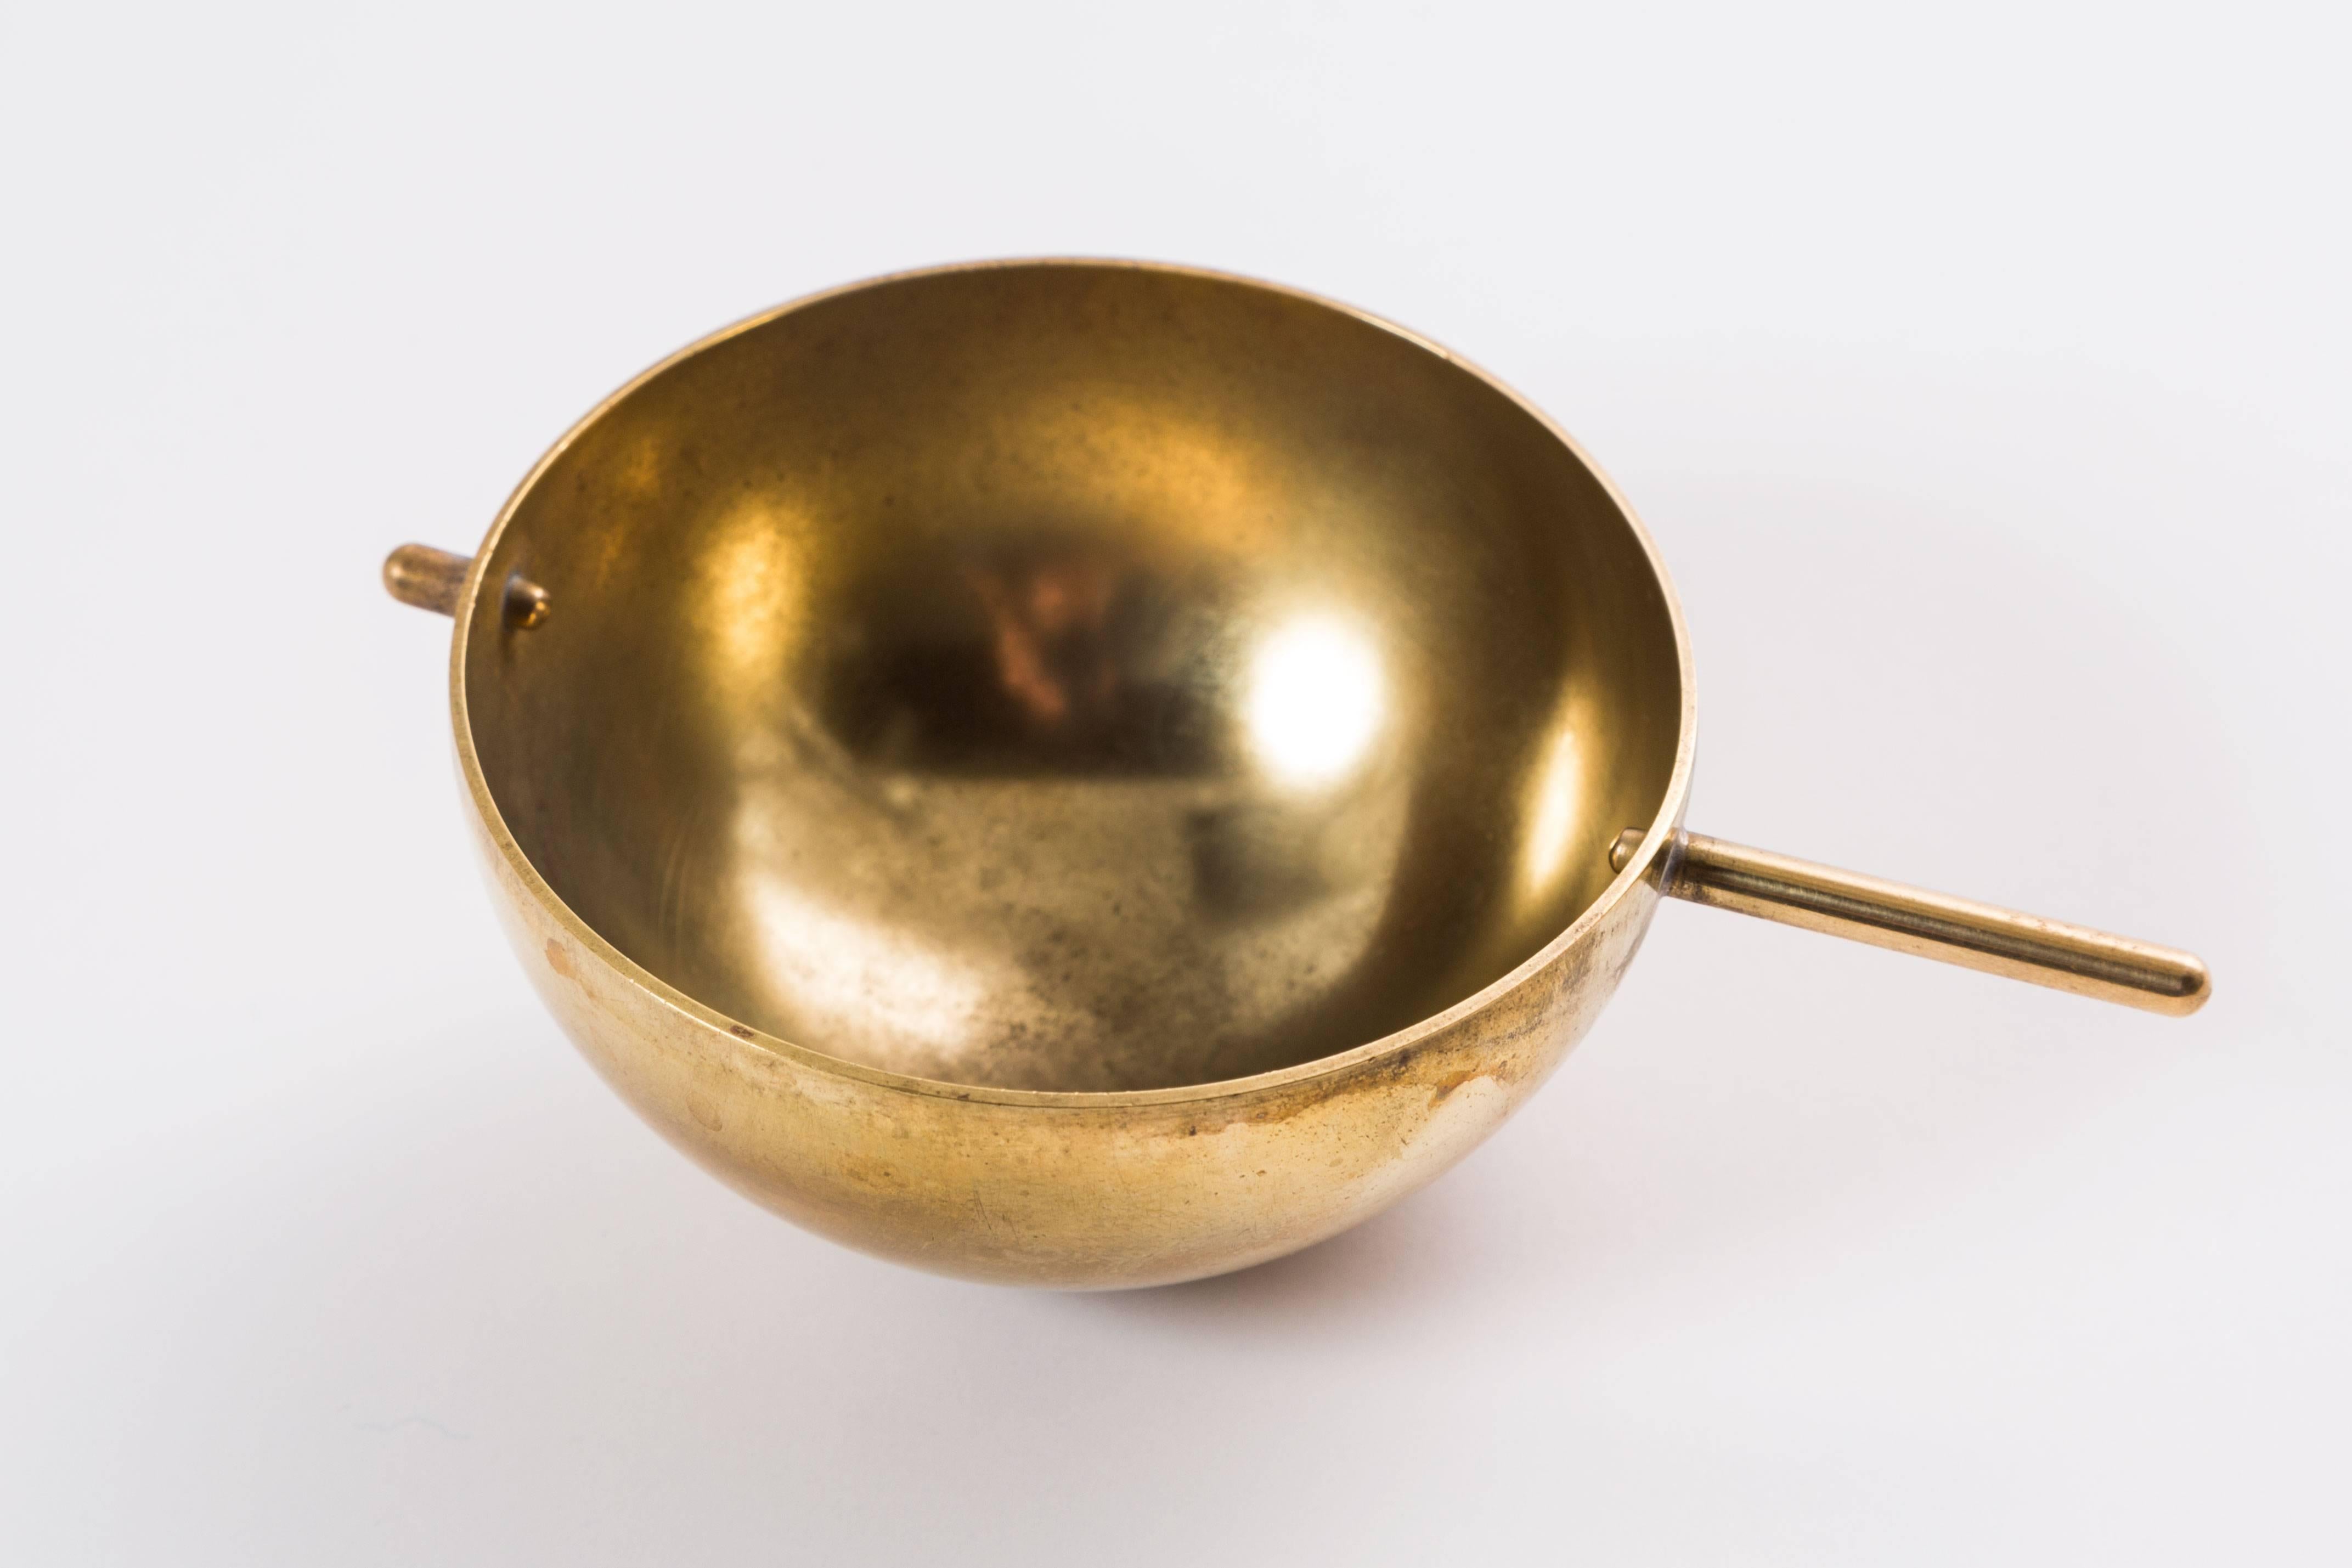 Mid-20th Century Rare Brass Cylinda-Line Ashtray by Arne Jacobsen for Stelton